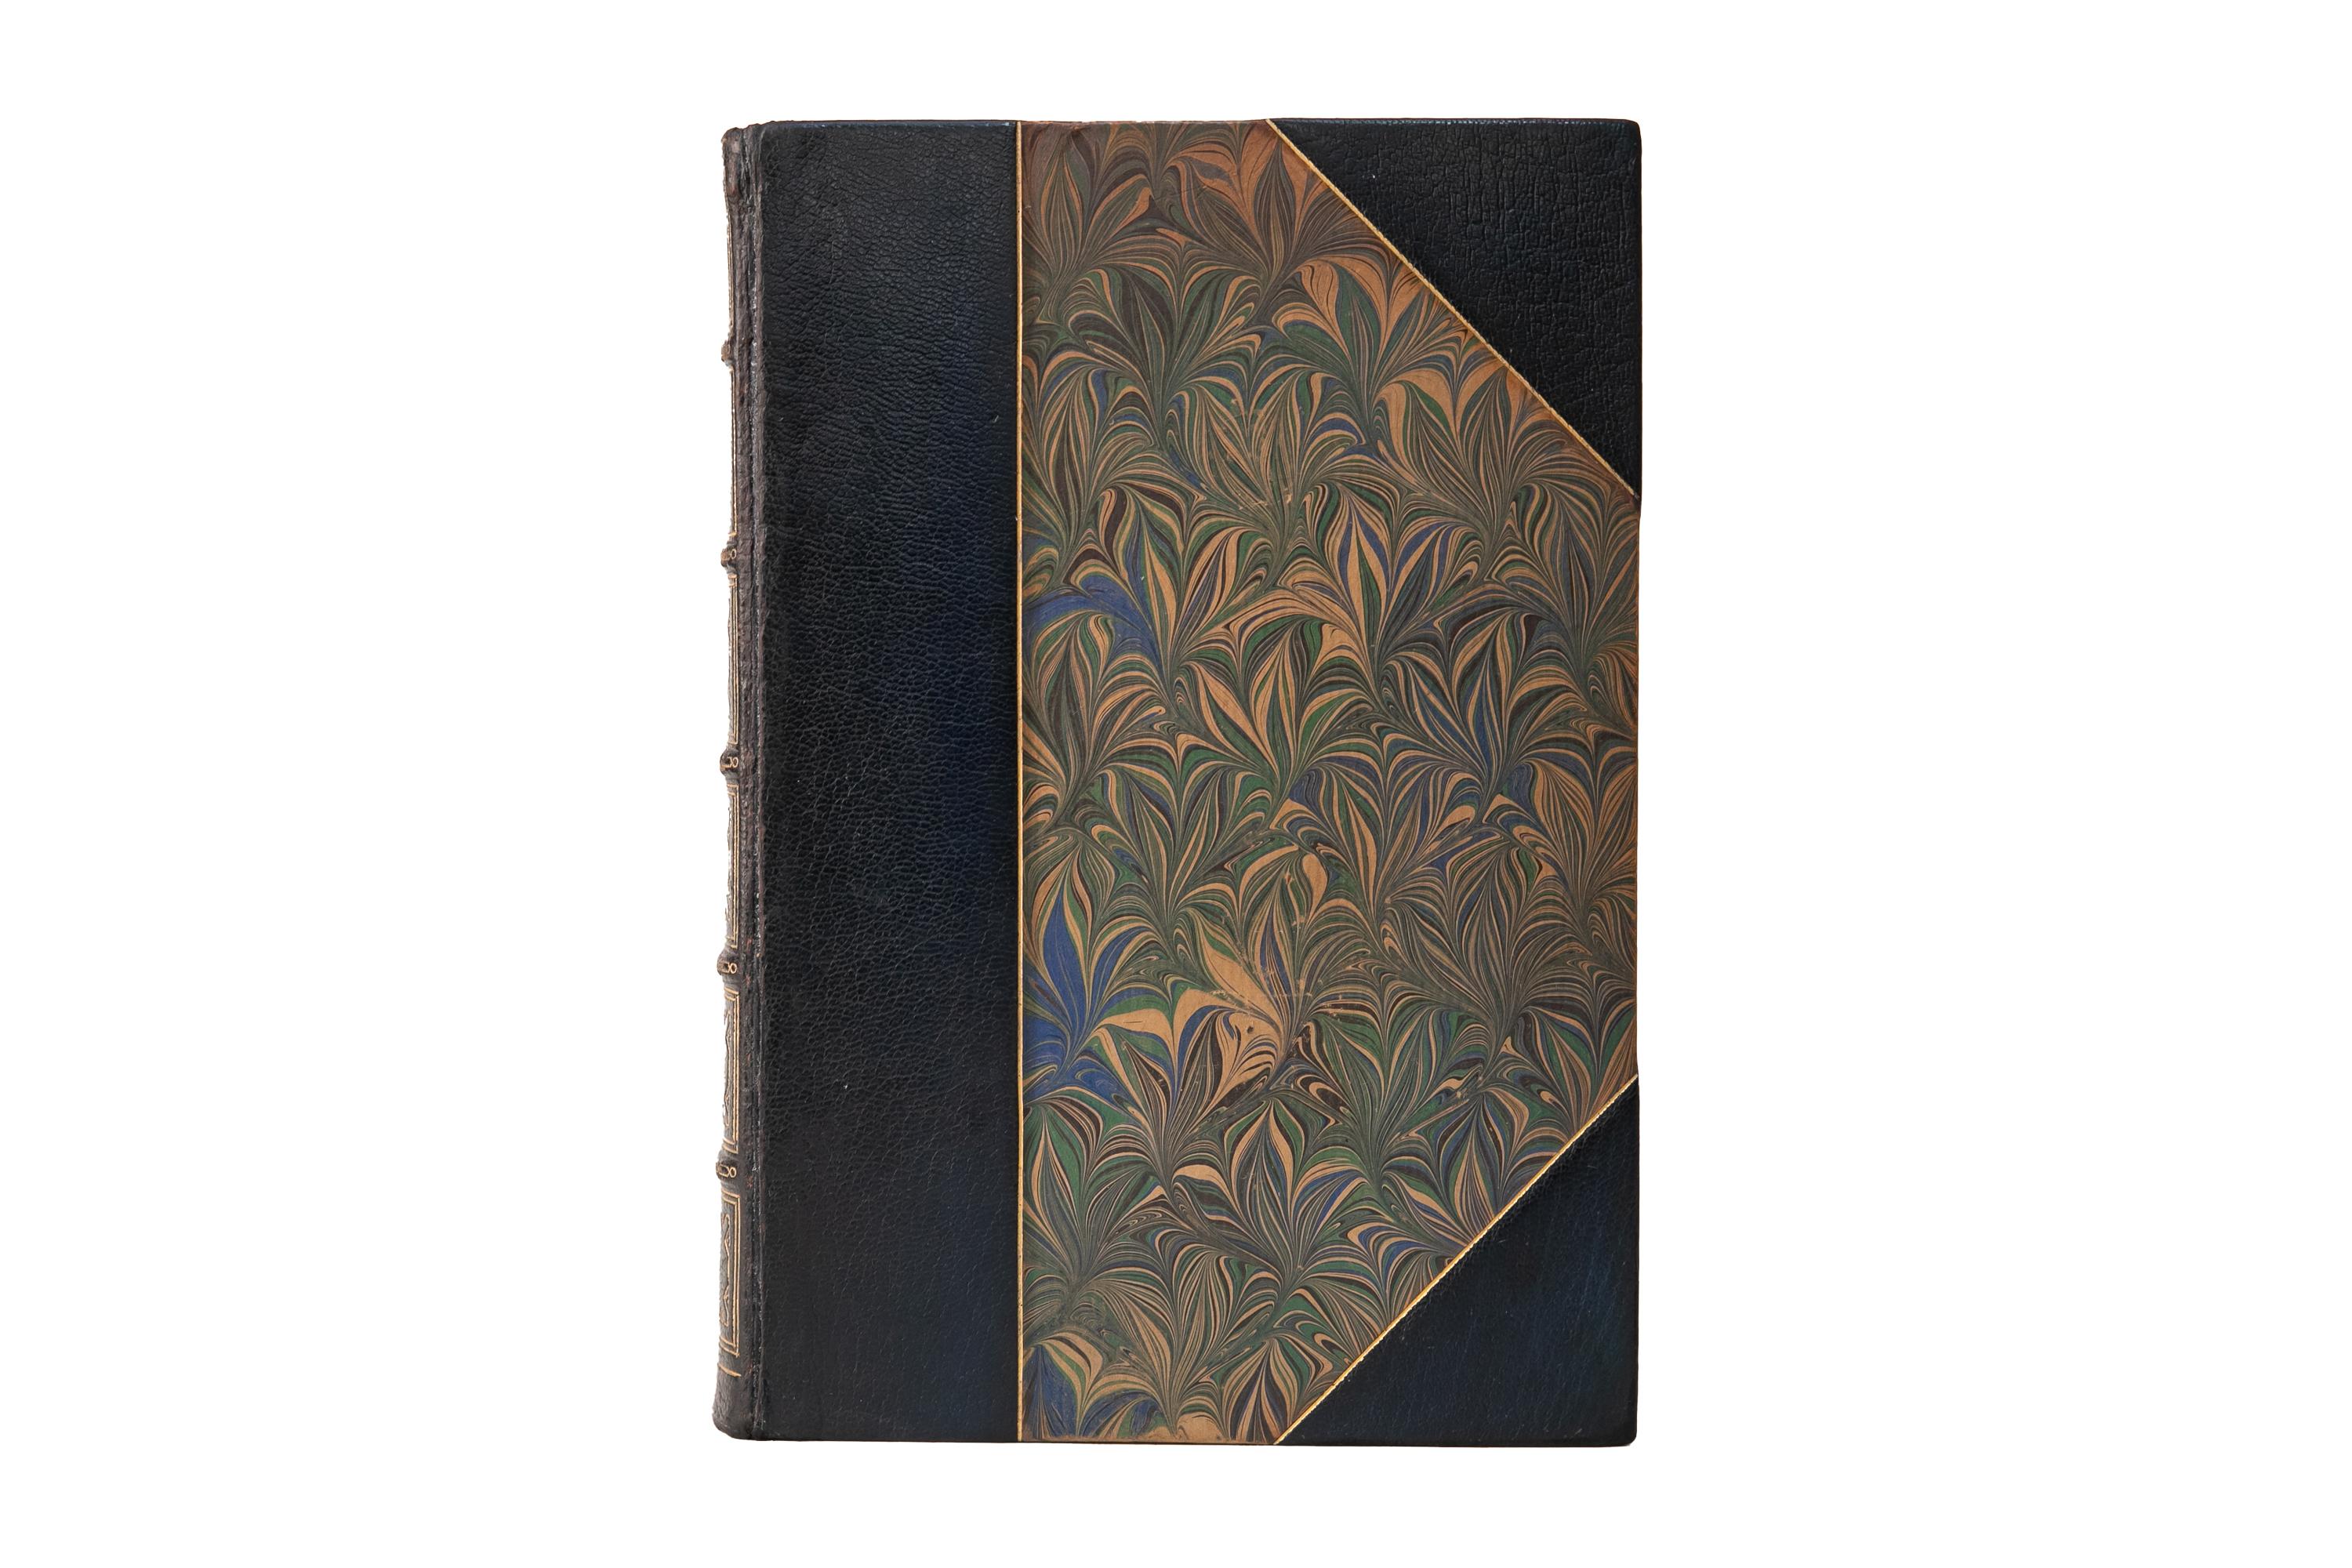 1 Volume. Plato, The Works. Bound by Bayntun in 2.4 blue morocco and marbled boards, bordered in gilt-tooling. The spines display raised bands, bordering, and label lettering, all gilt-tooled. The top edge is gilded with marbled endpapers.